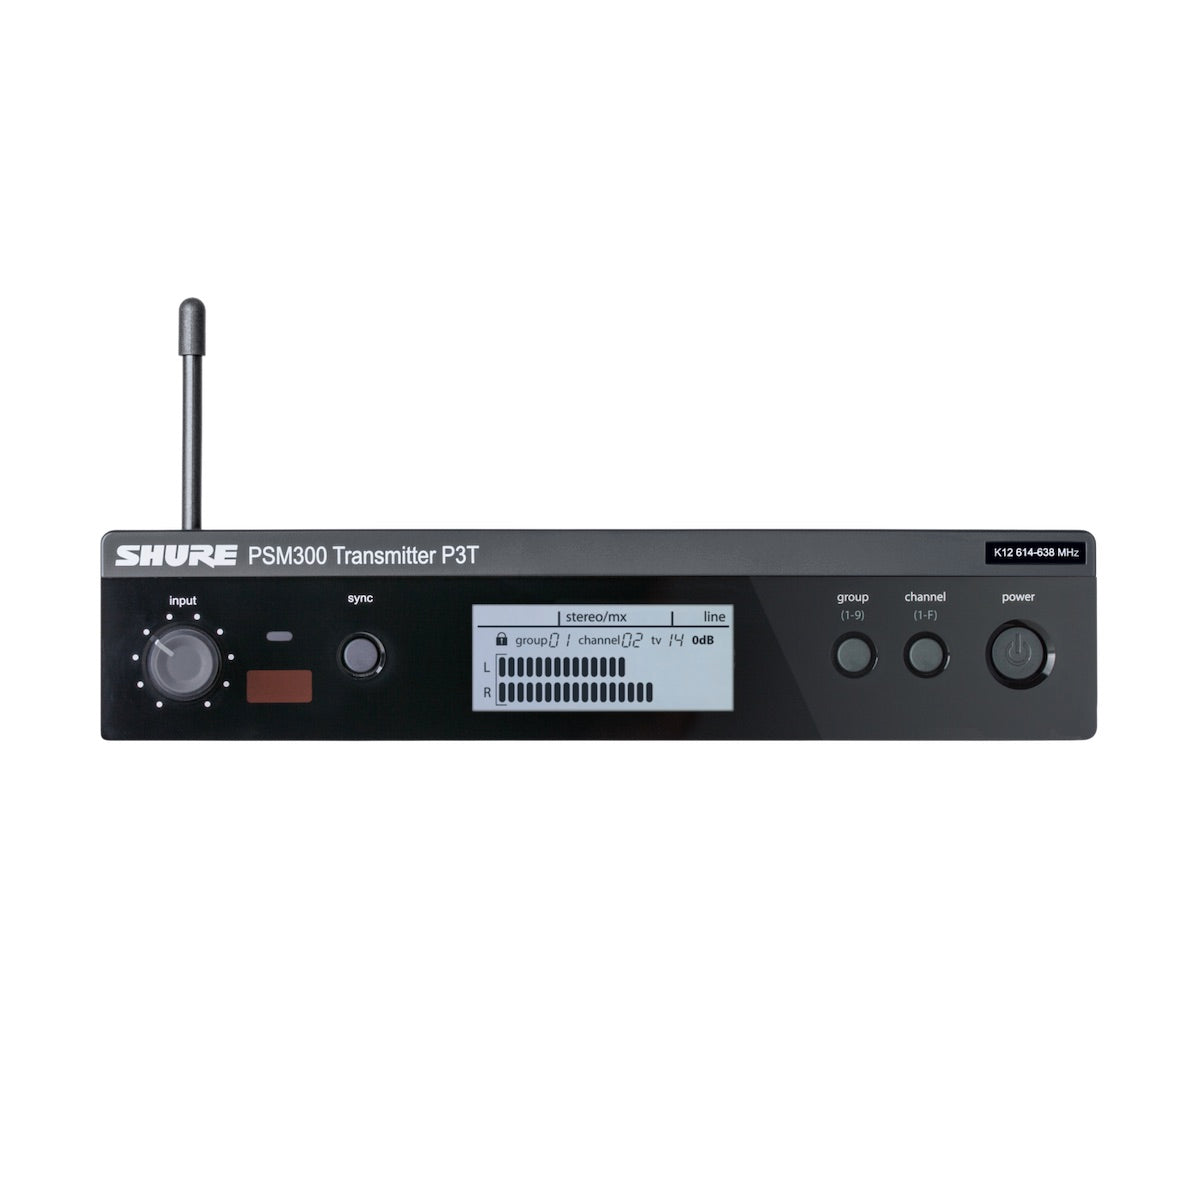 Shure PSM 300 Transmitter P3T, front